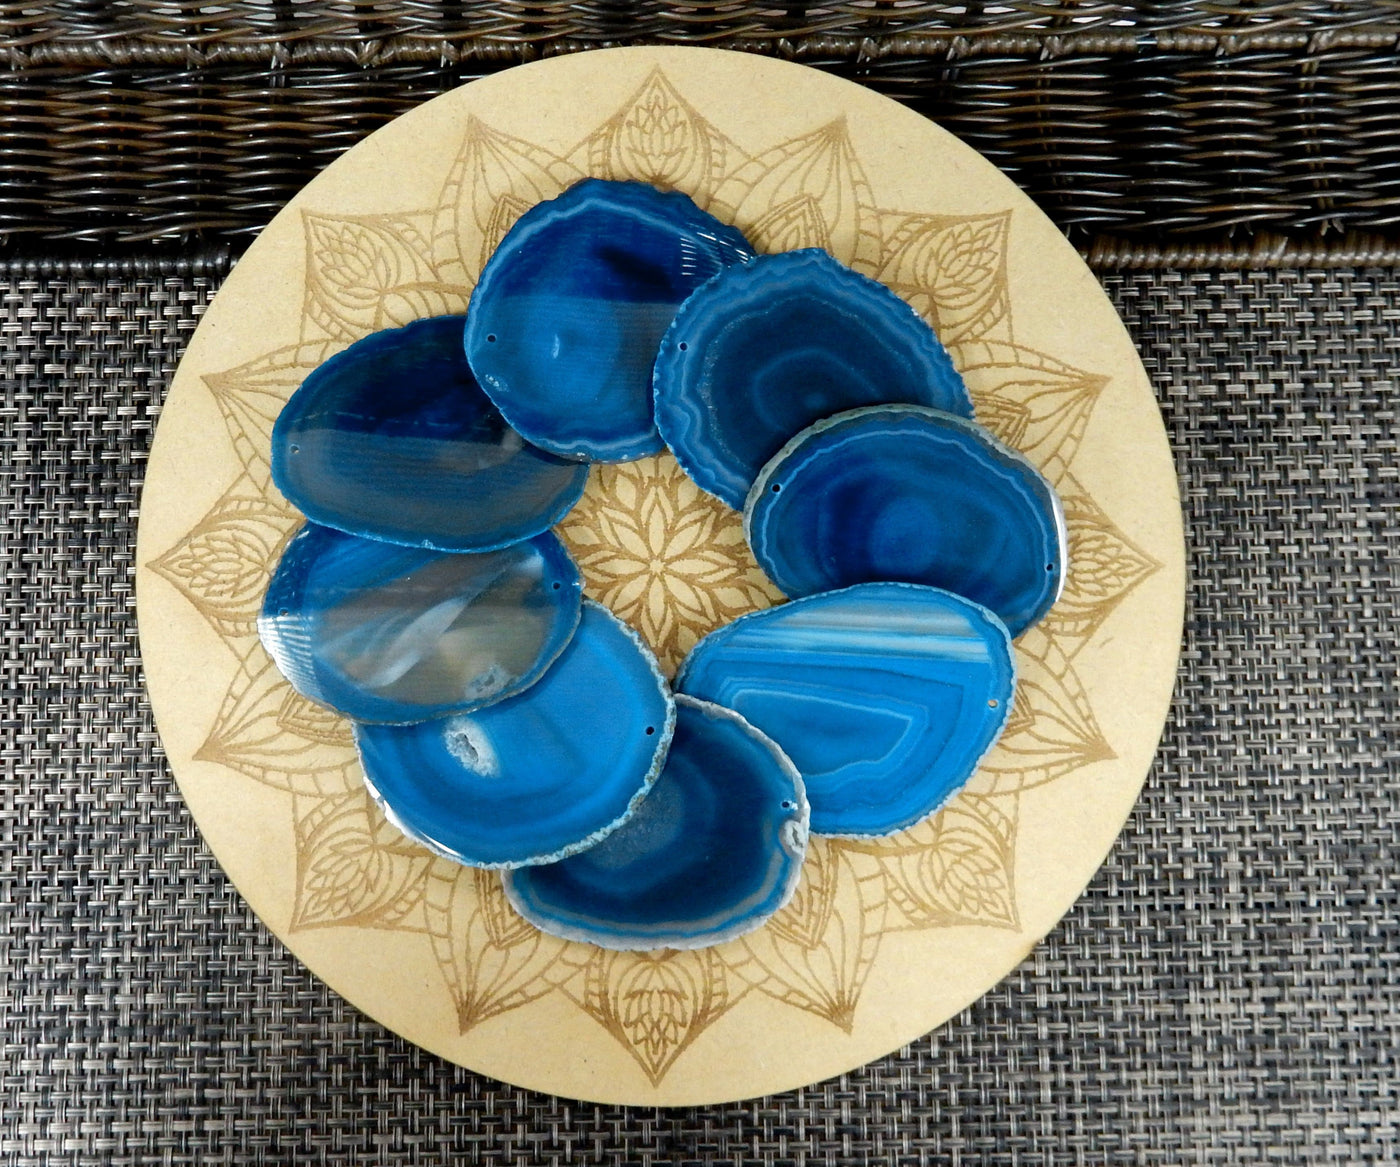 blue agate slices being displayed on a wooden grid.